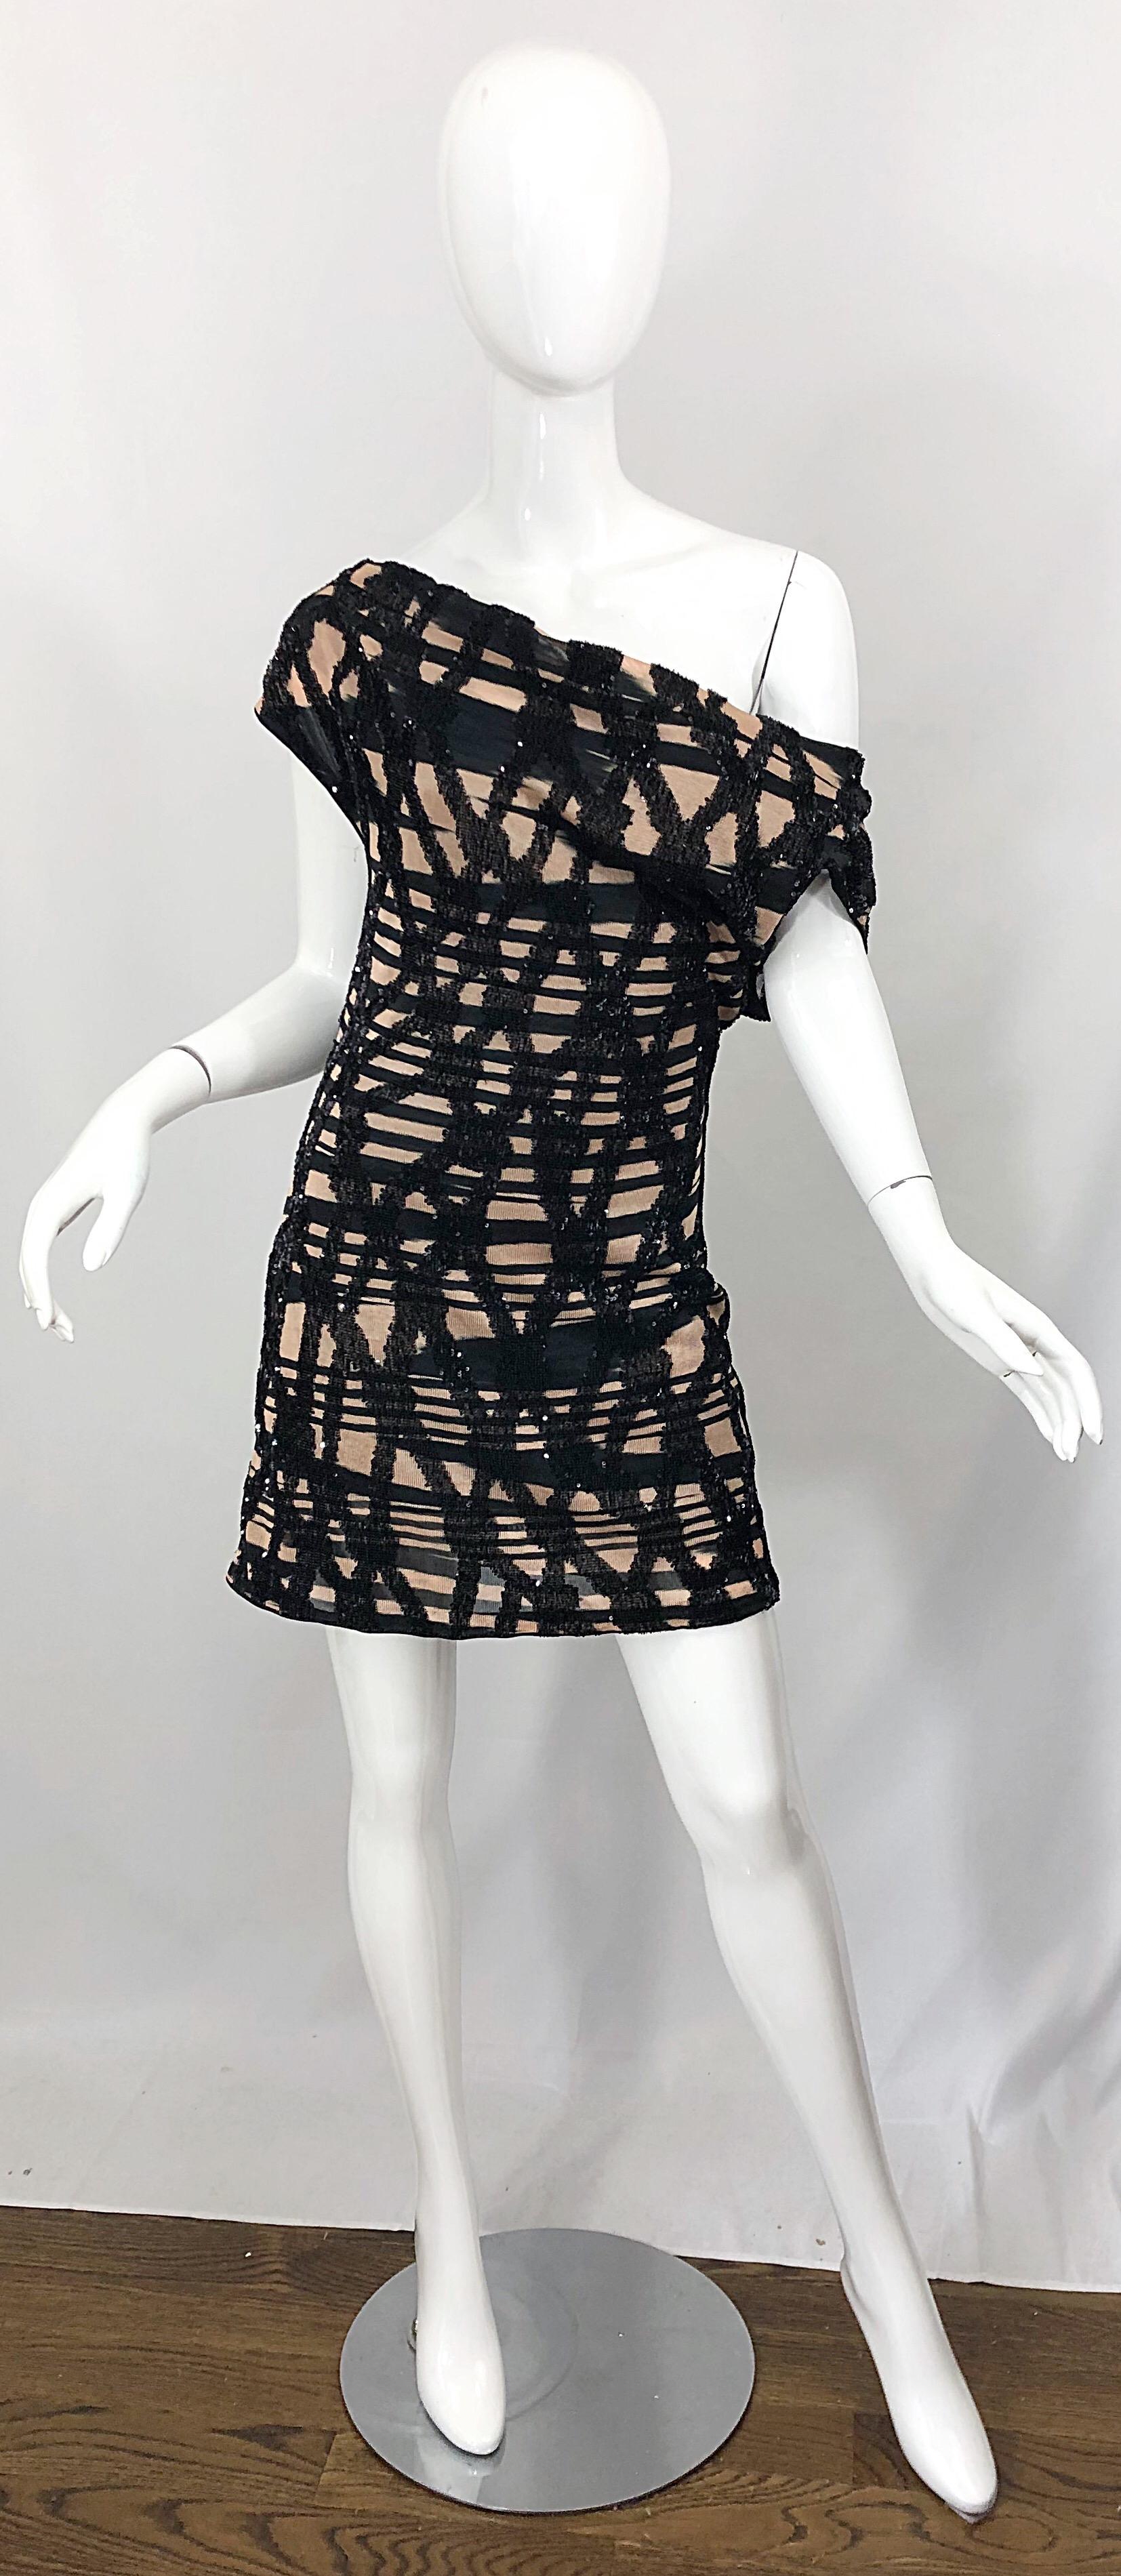 Missoni Early 2000s Black + Nude Sequined Size 40 / 4 - 6 Abstract Mini Dress For Sale 4